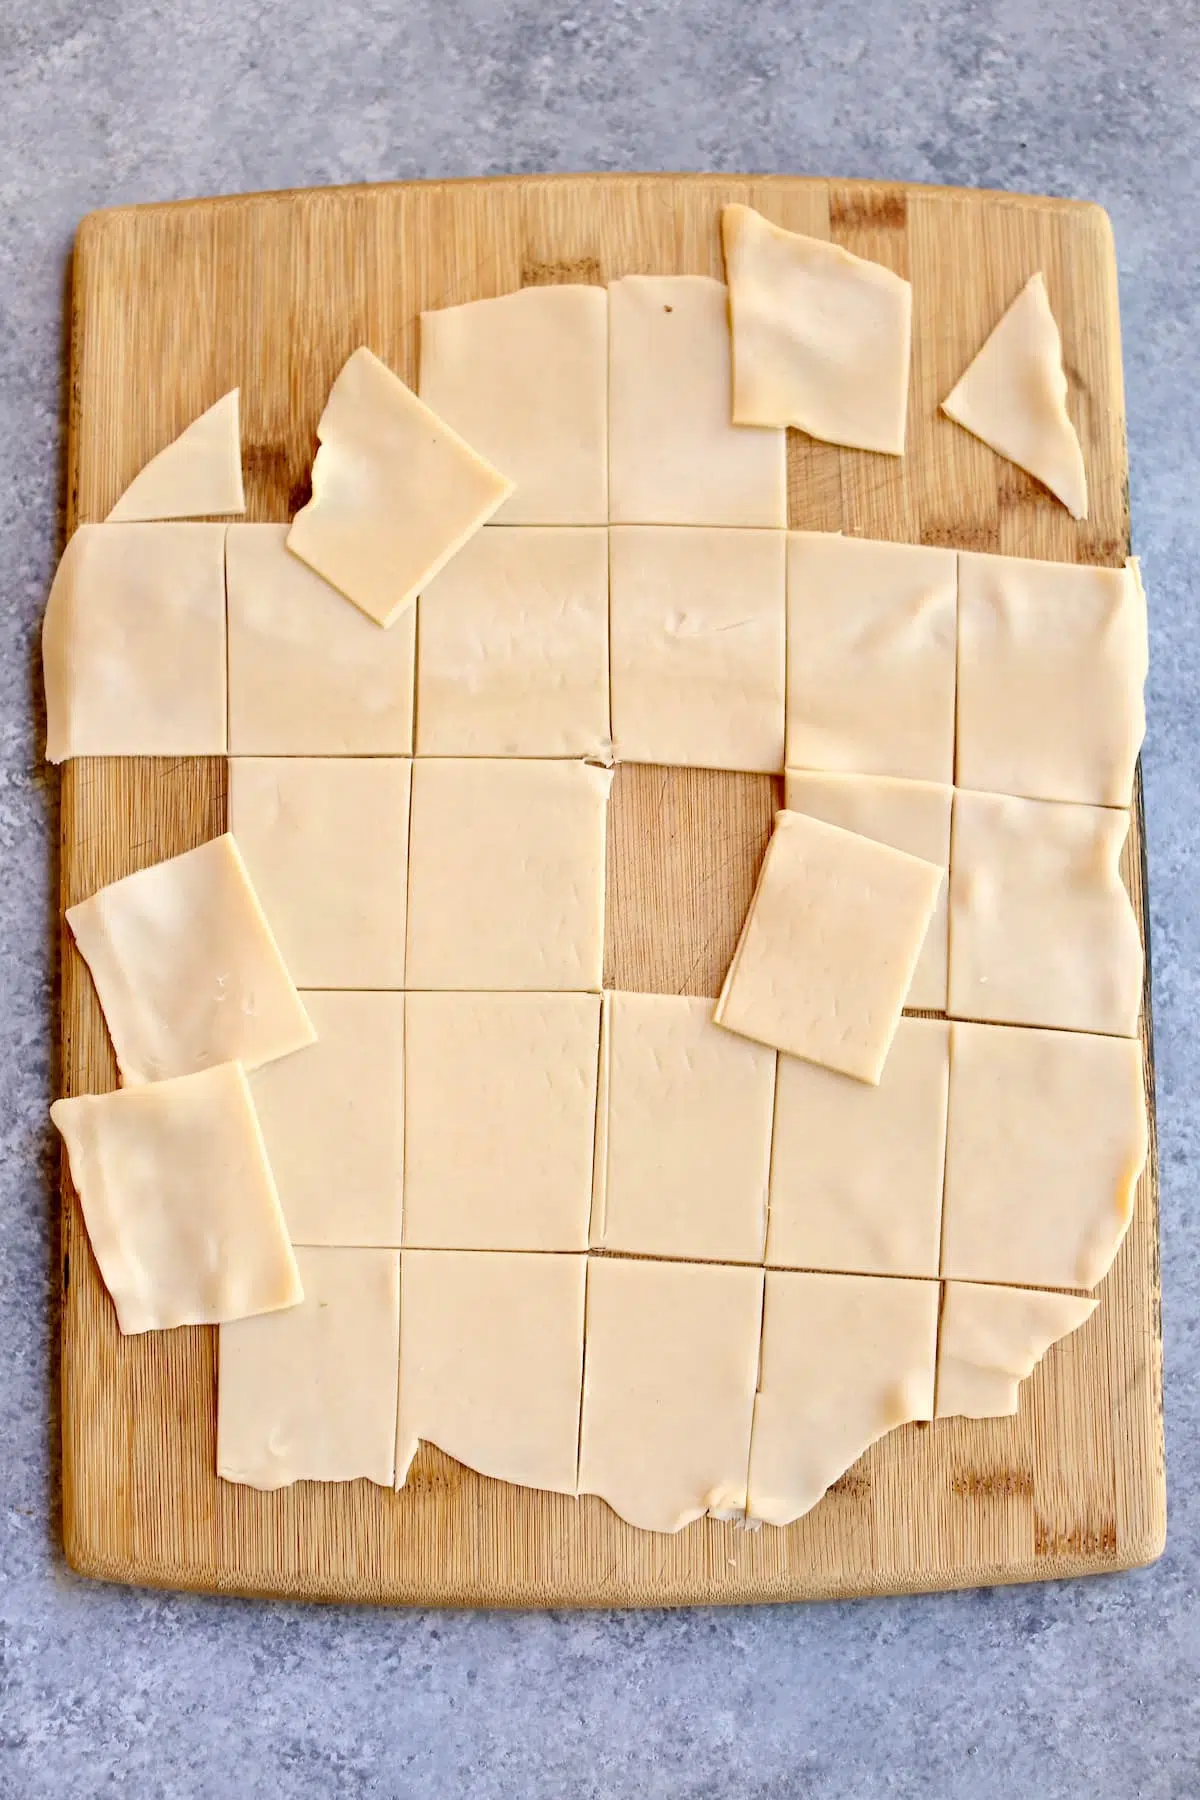 a cutting board with raw pie crust on it cut in squares.